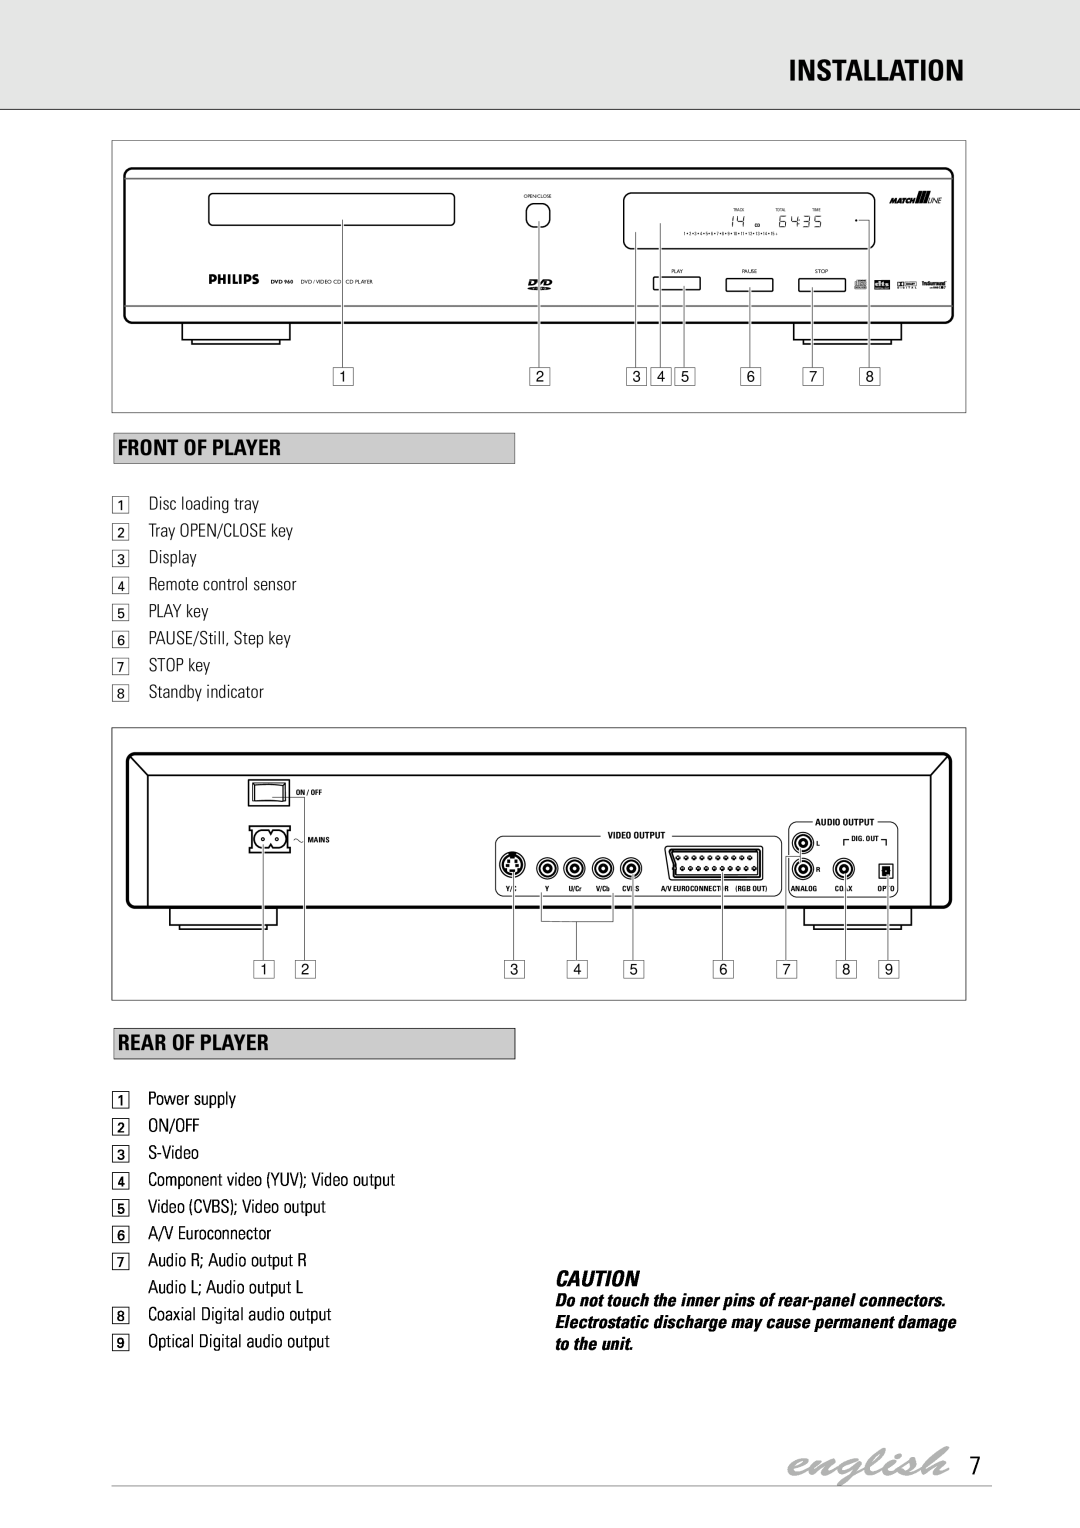 Dolby Laboratories DVD Video manual Installation, Front Of Player, Rear Of Player, english 